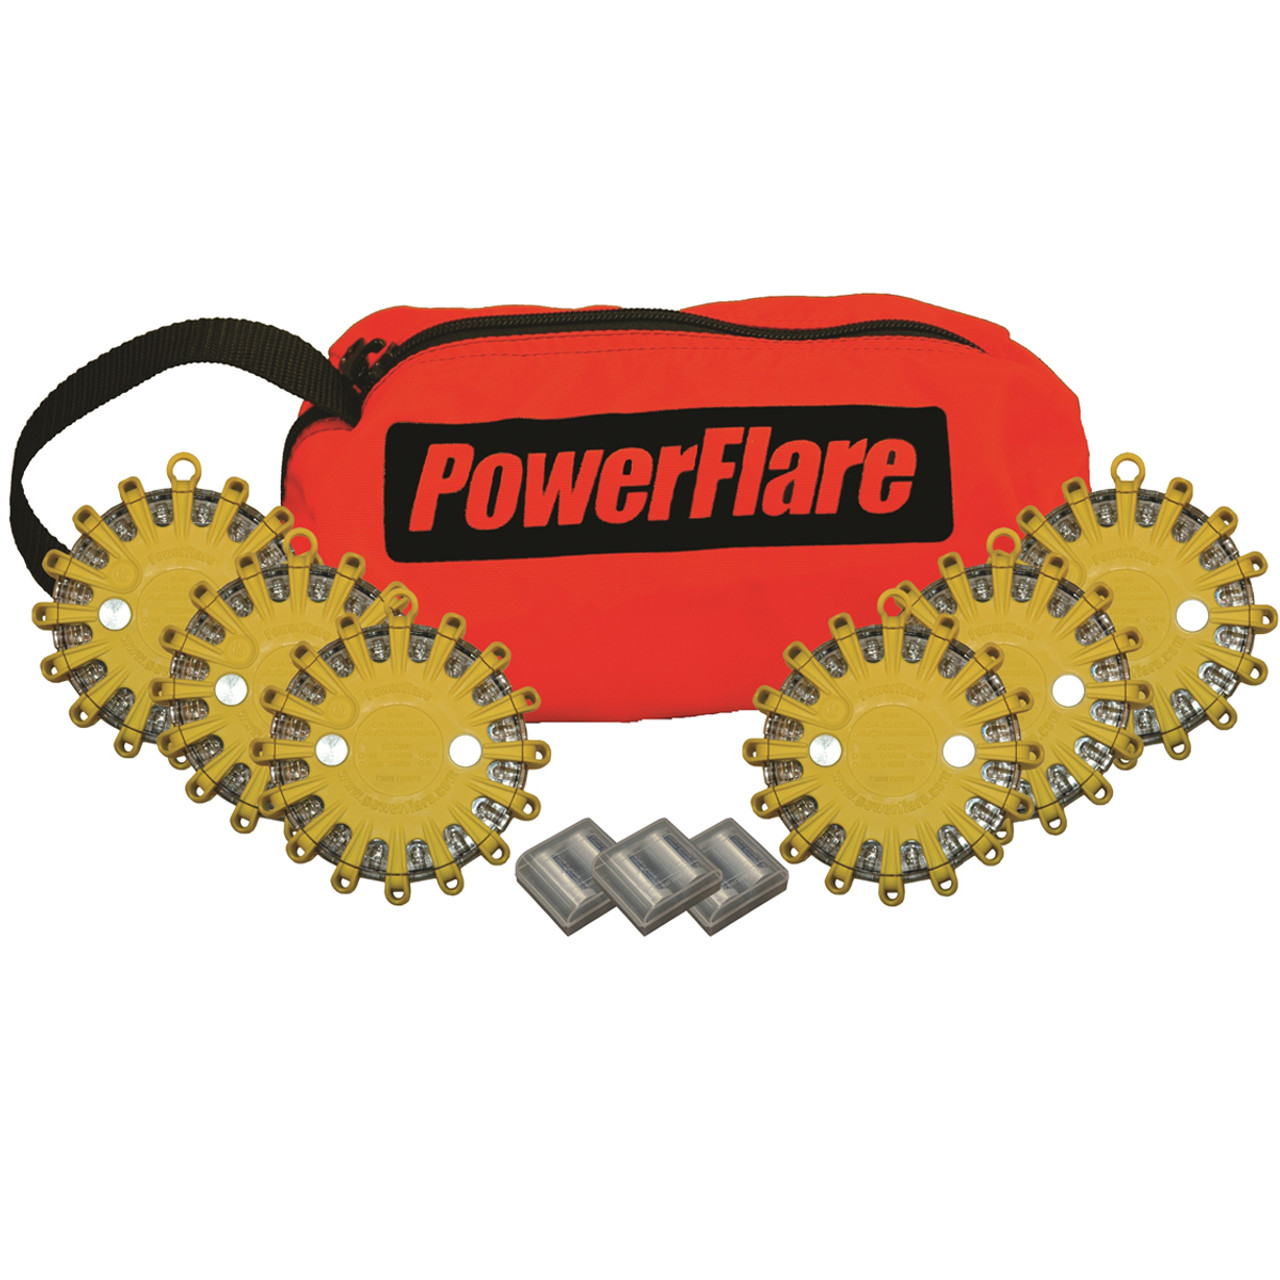 PowerFlare LED Safety Light w/Rechargeable Battery